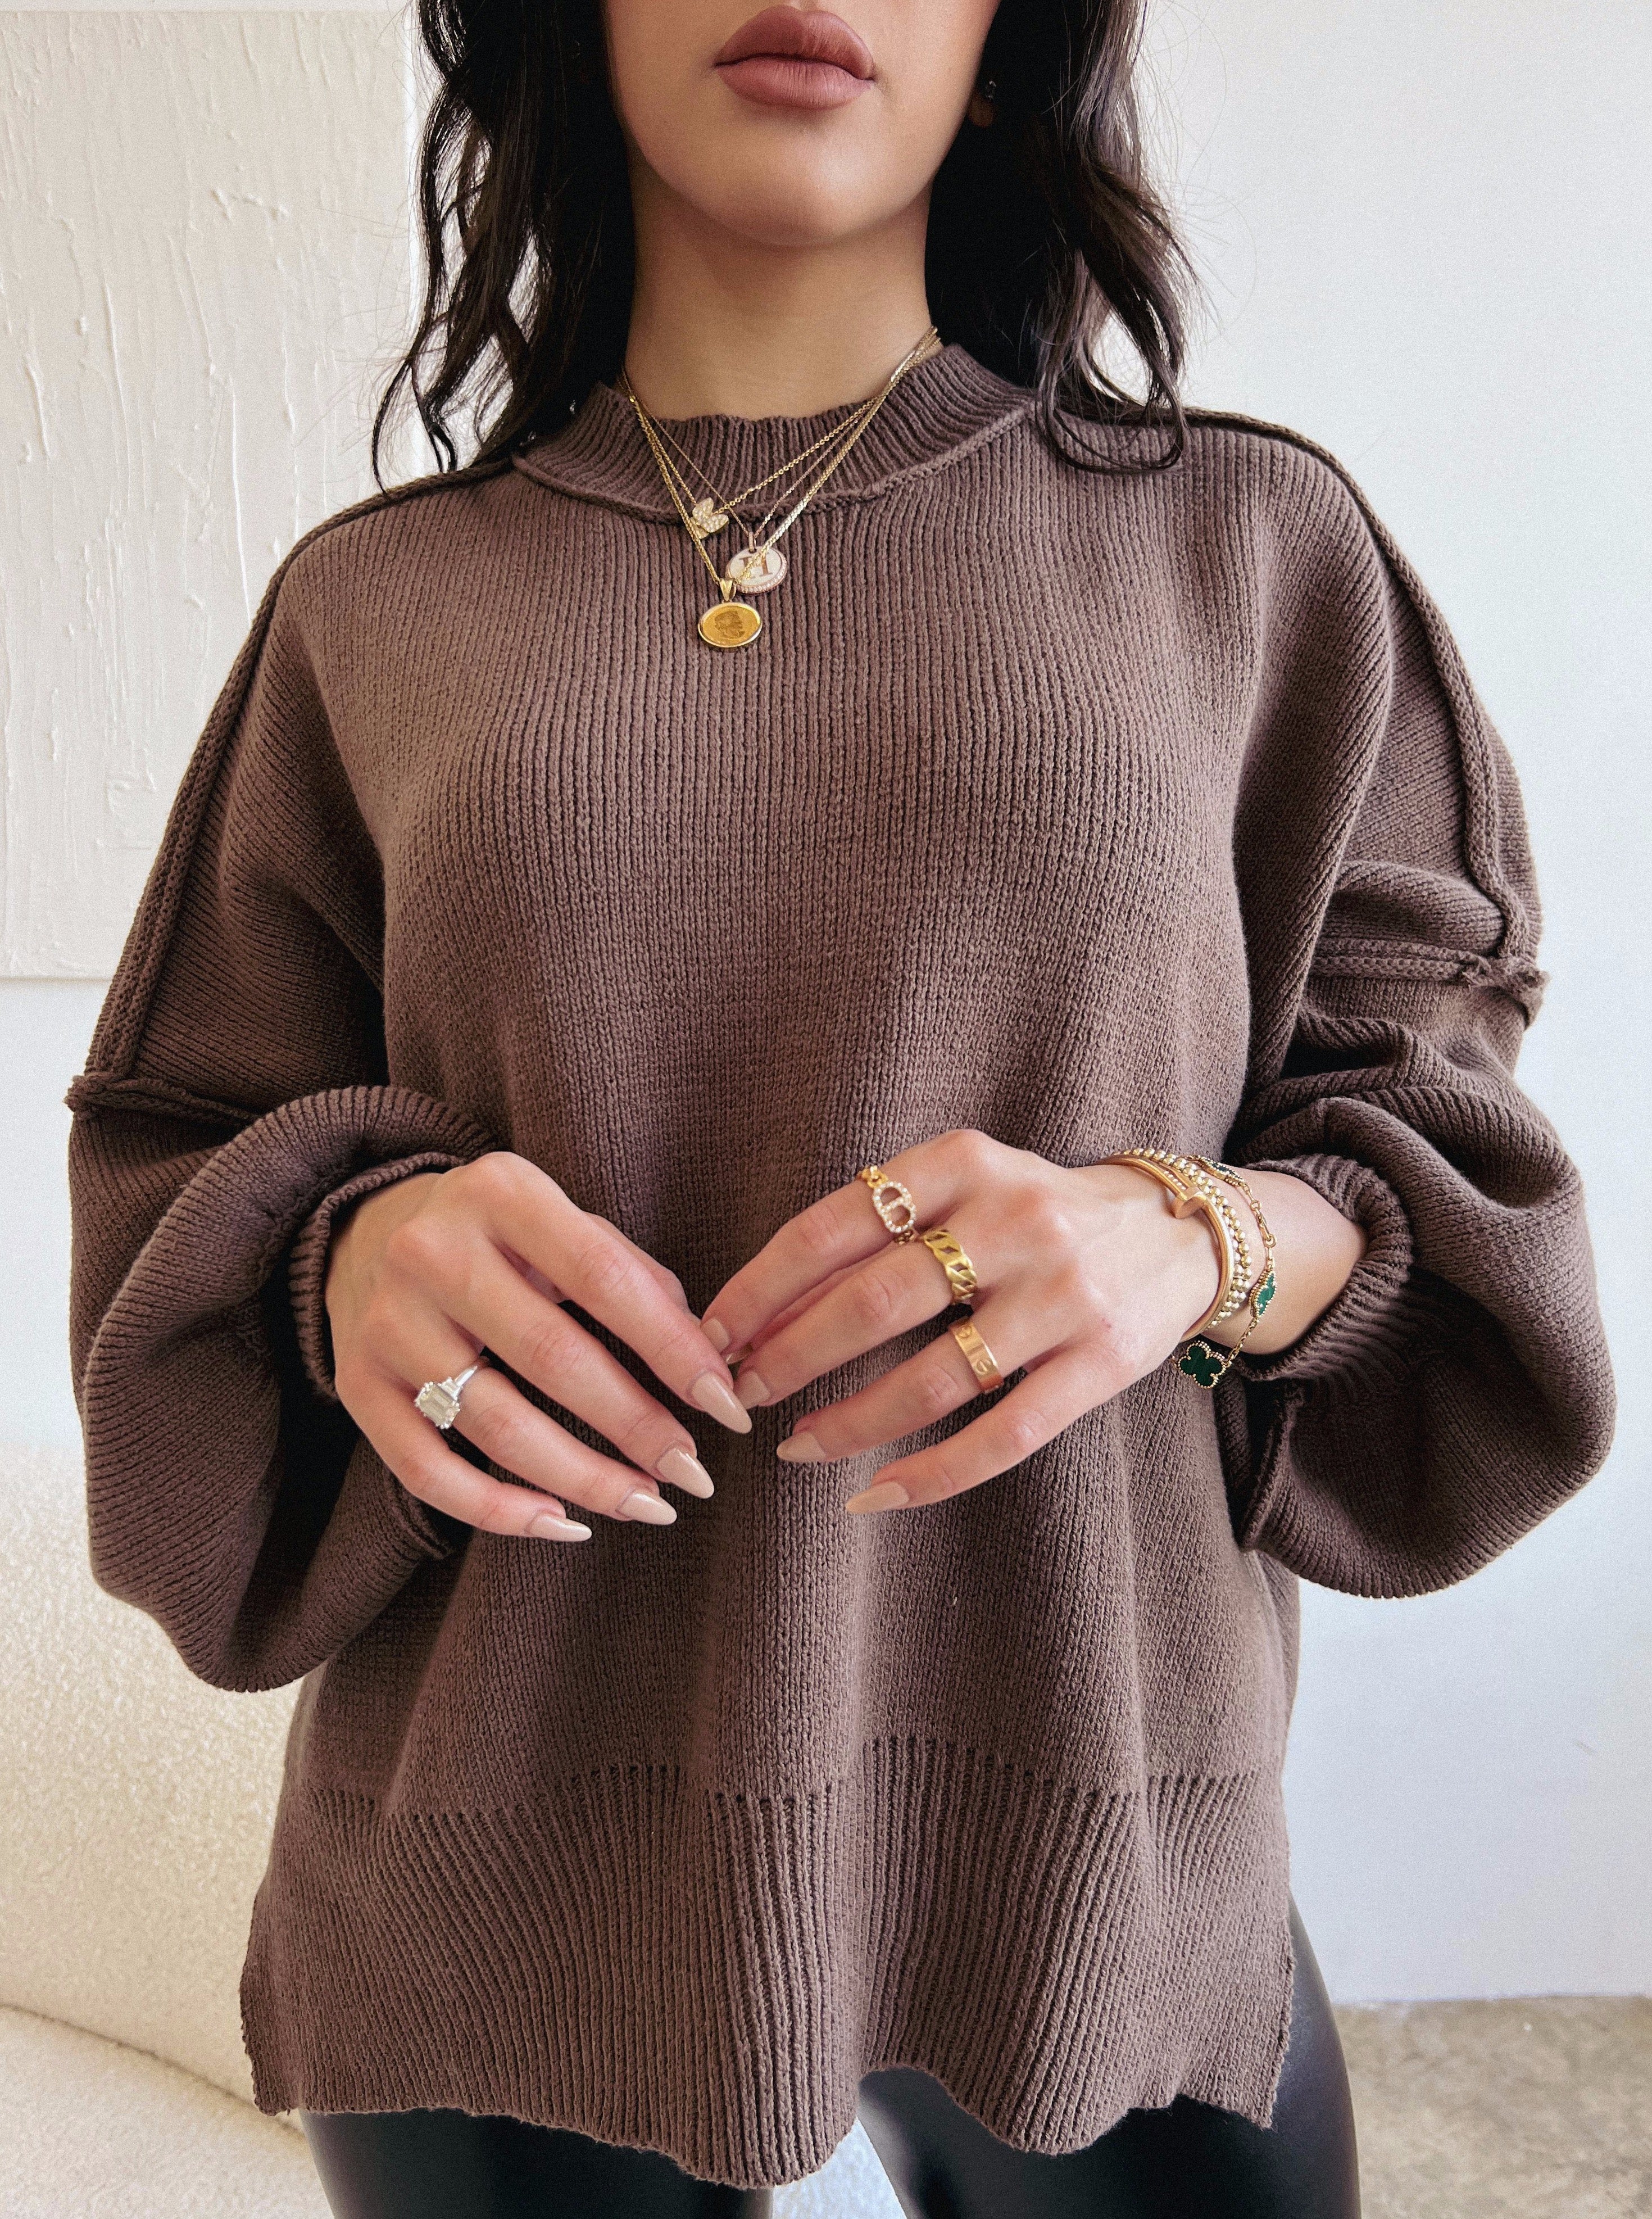 "DELILAH" Brown Knitted Sweater